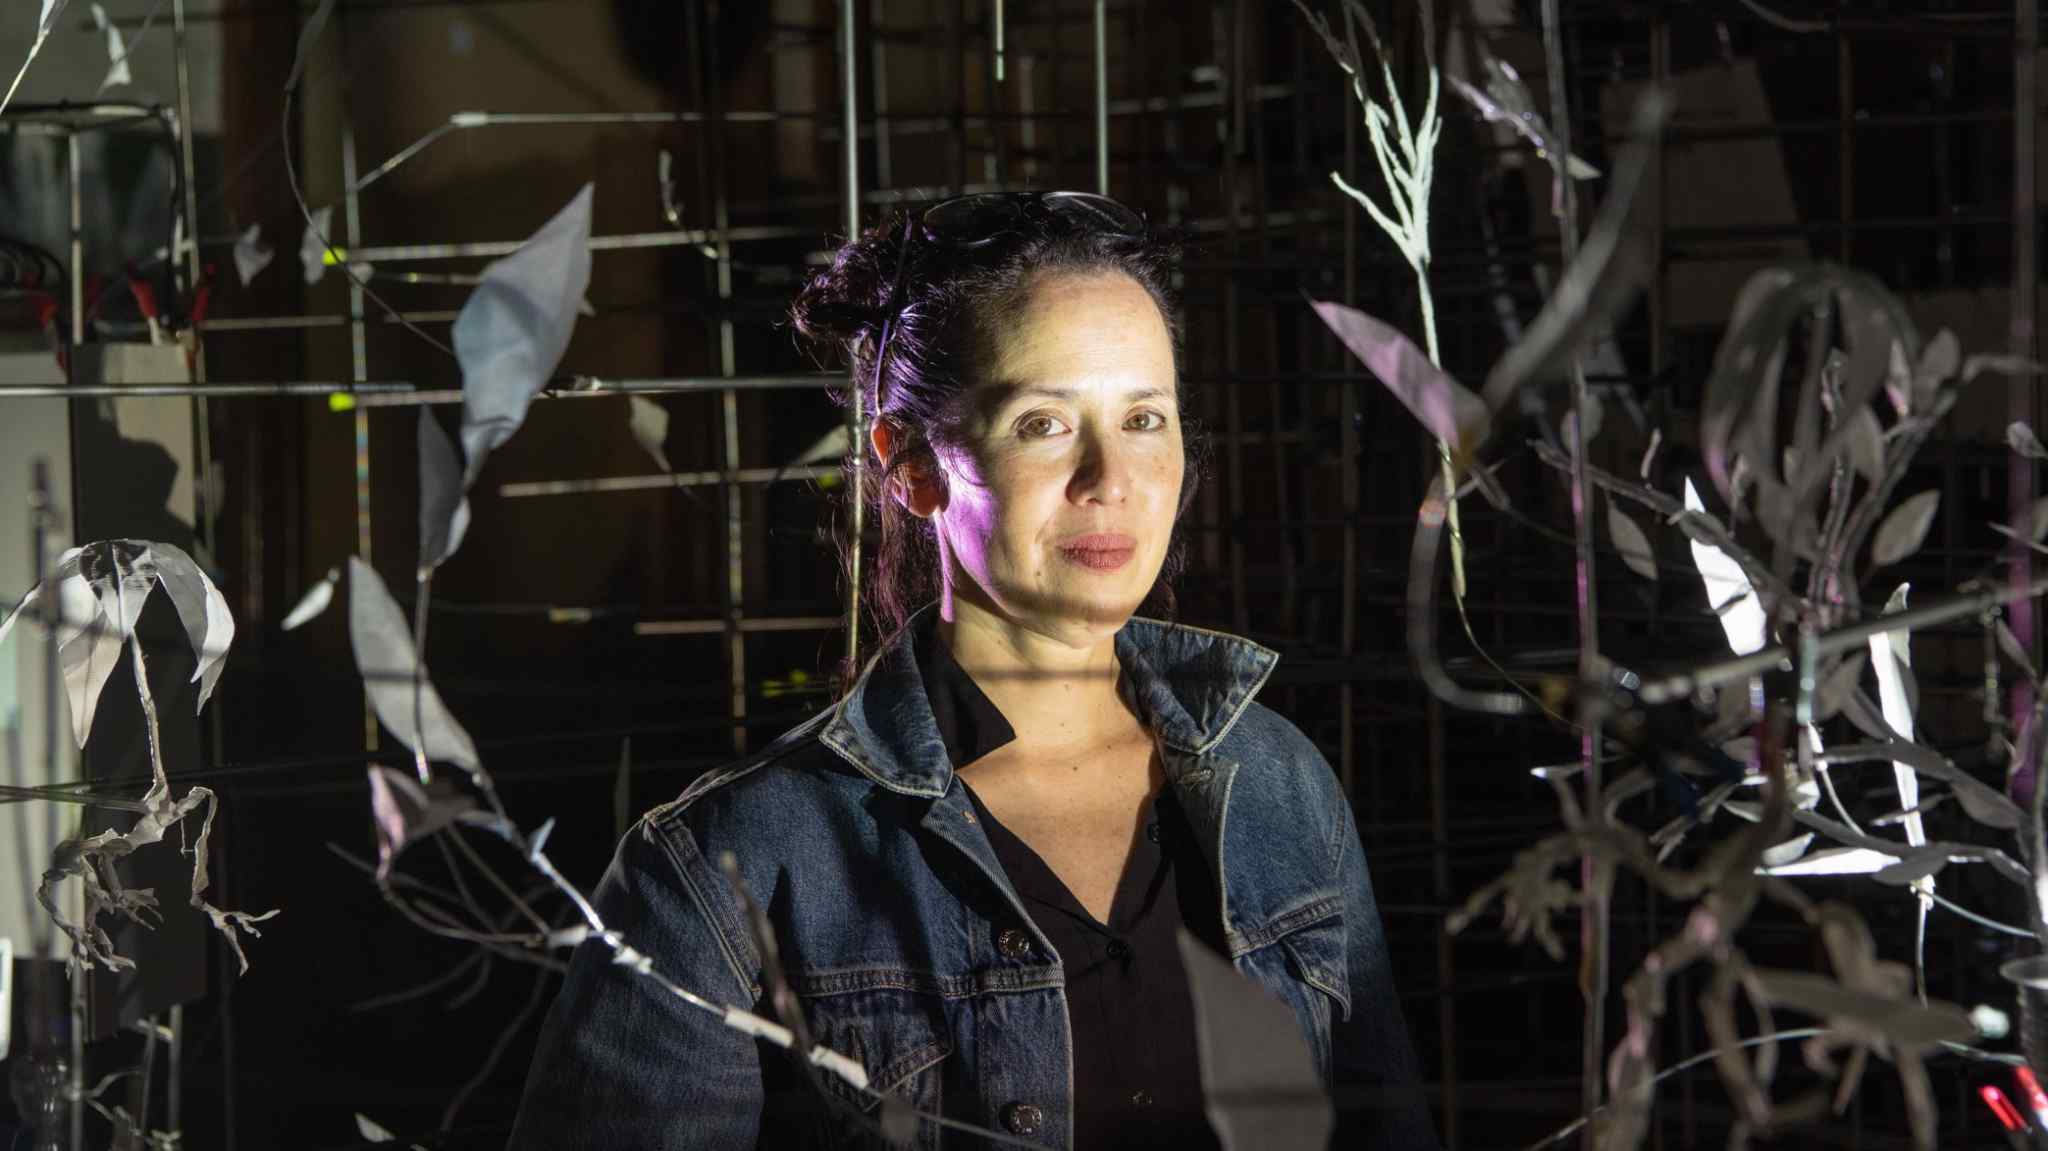 Artist Sarah Sze: ‘My goal is to create something you’ve never seen before’